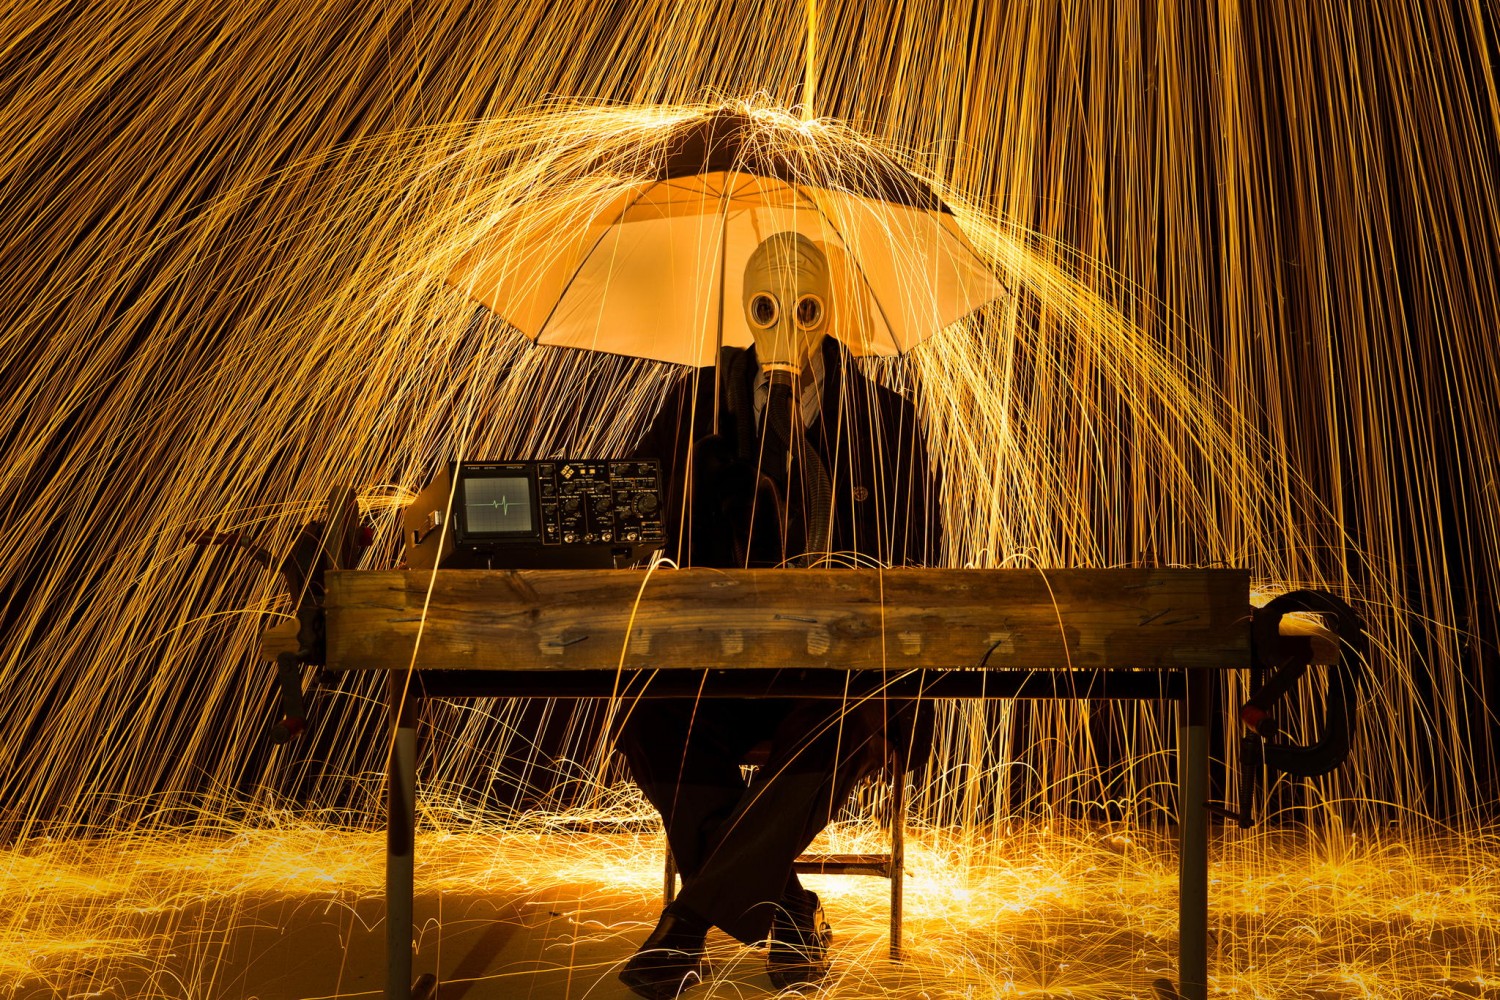 21 Fiery Photos: The Best Steel Wool Photography on 500px